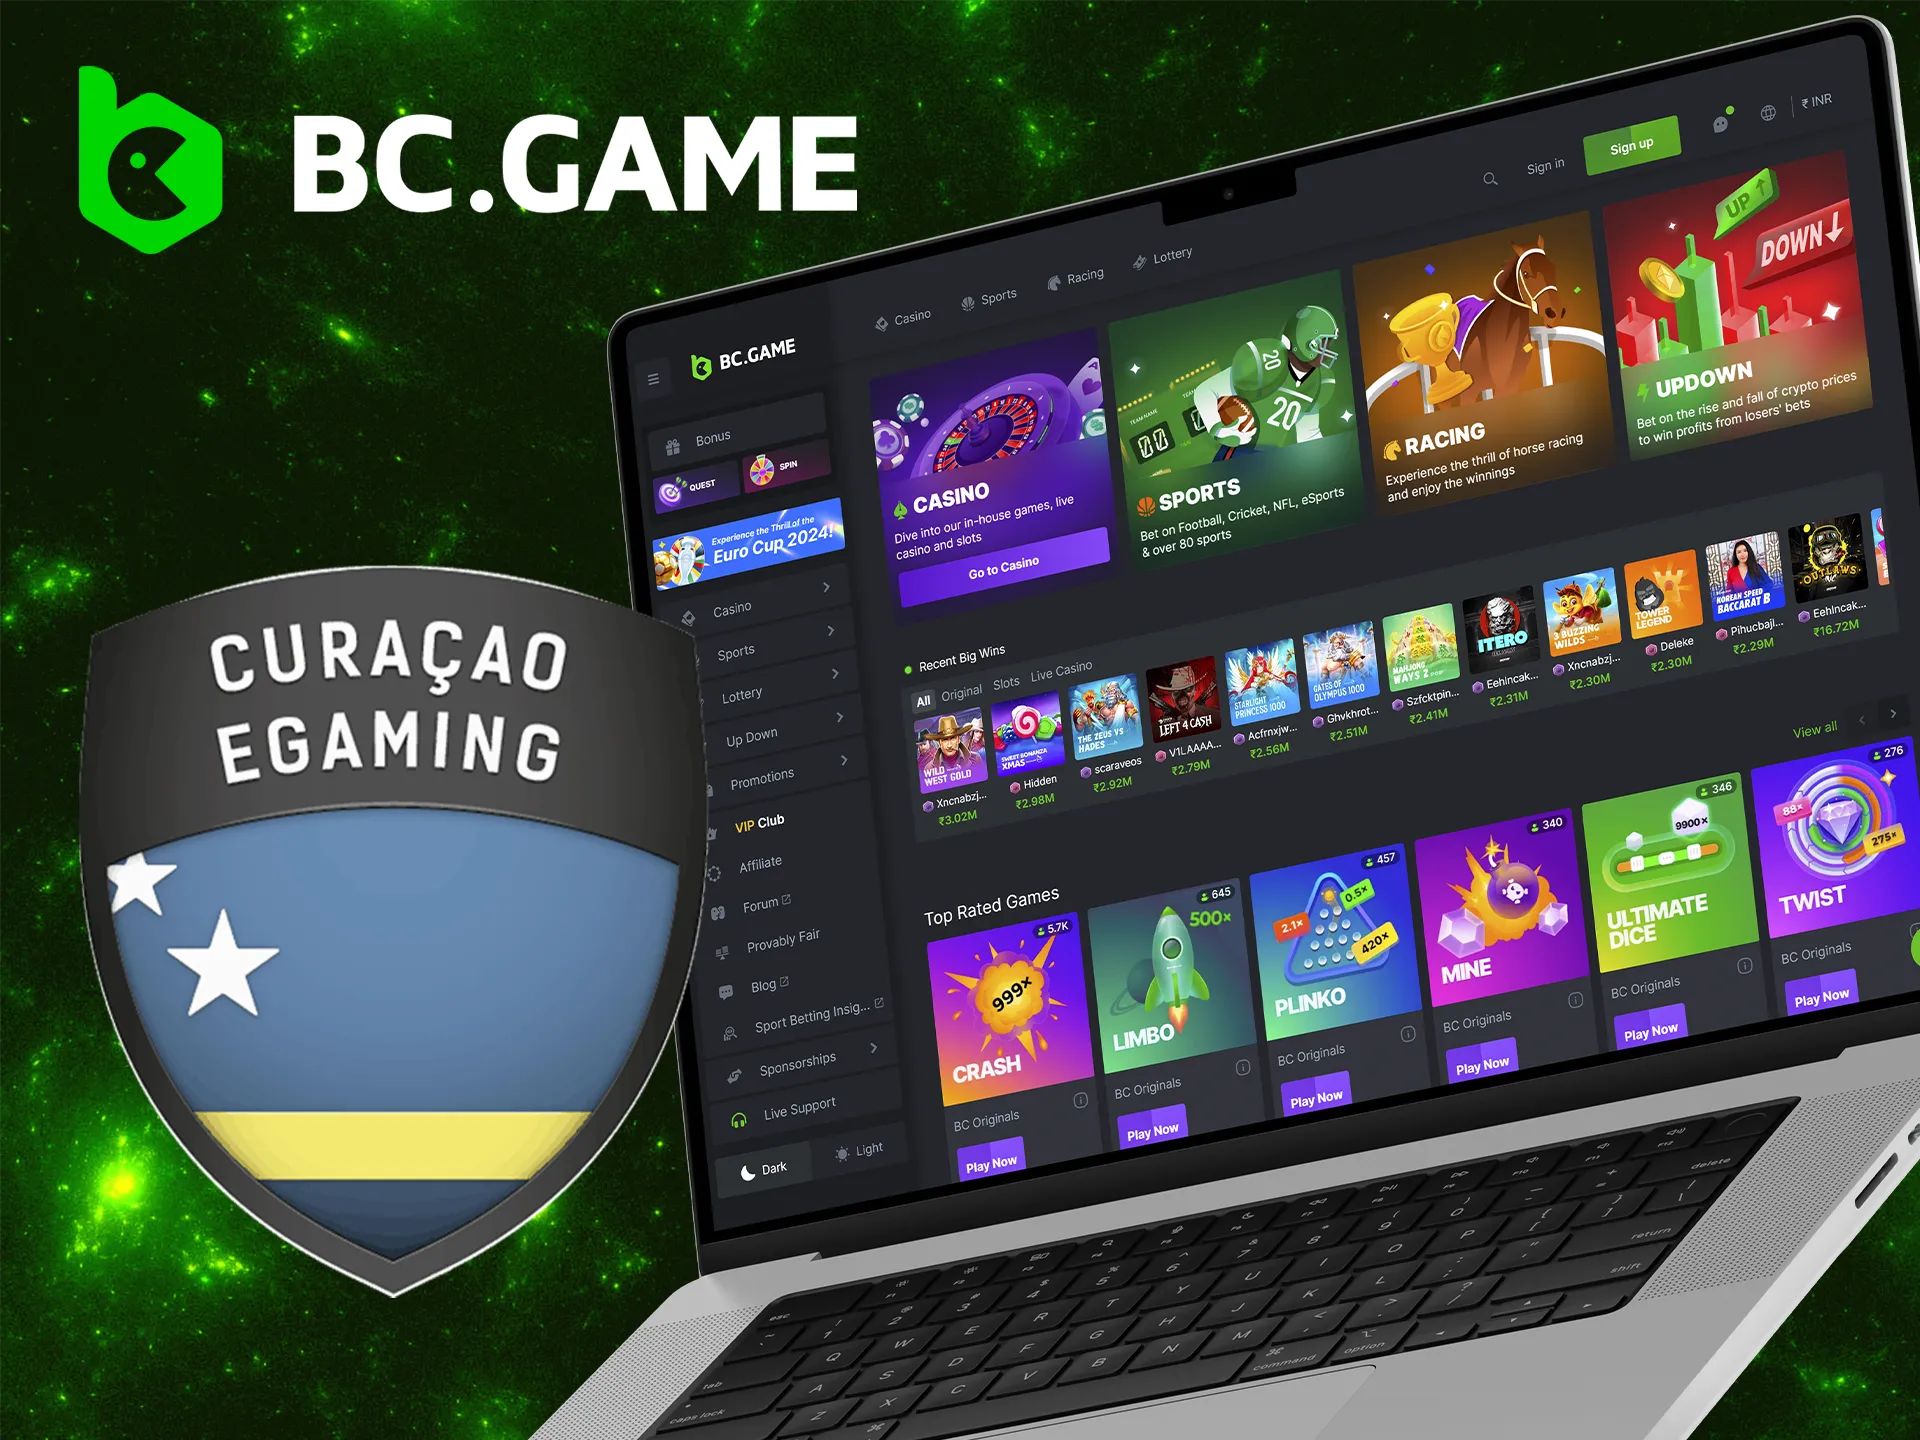 Read more information about BC Game's license.